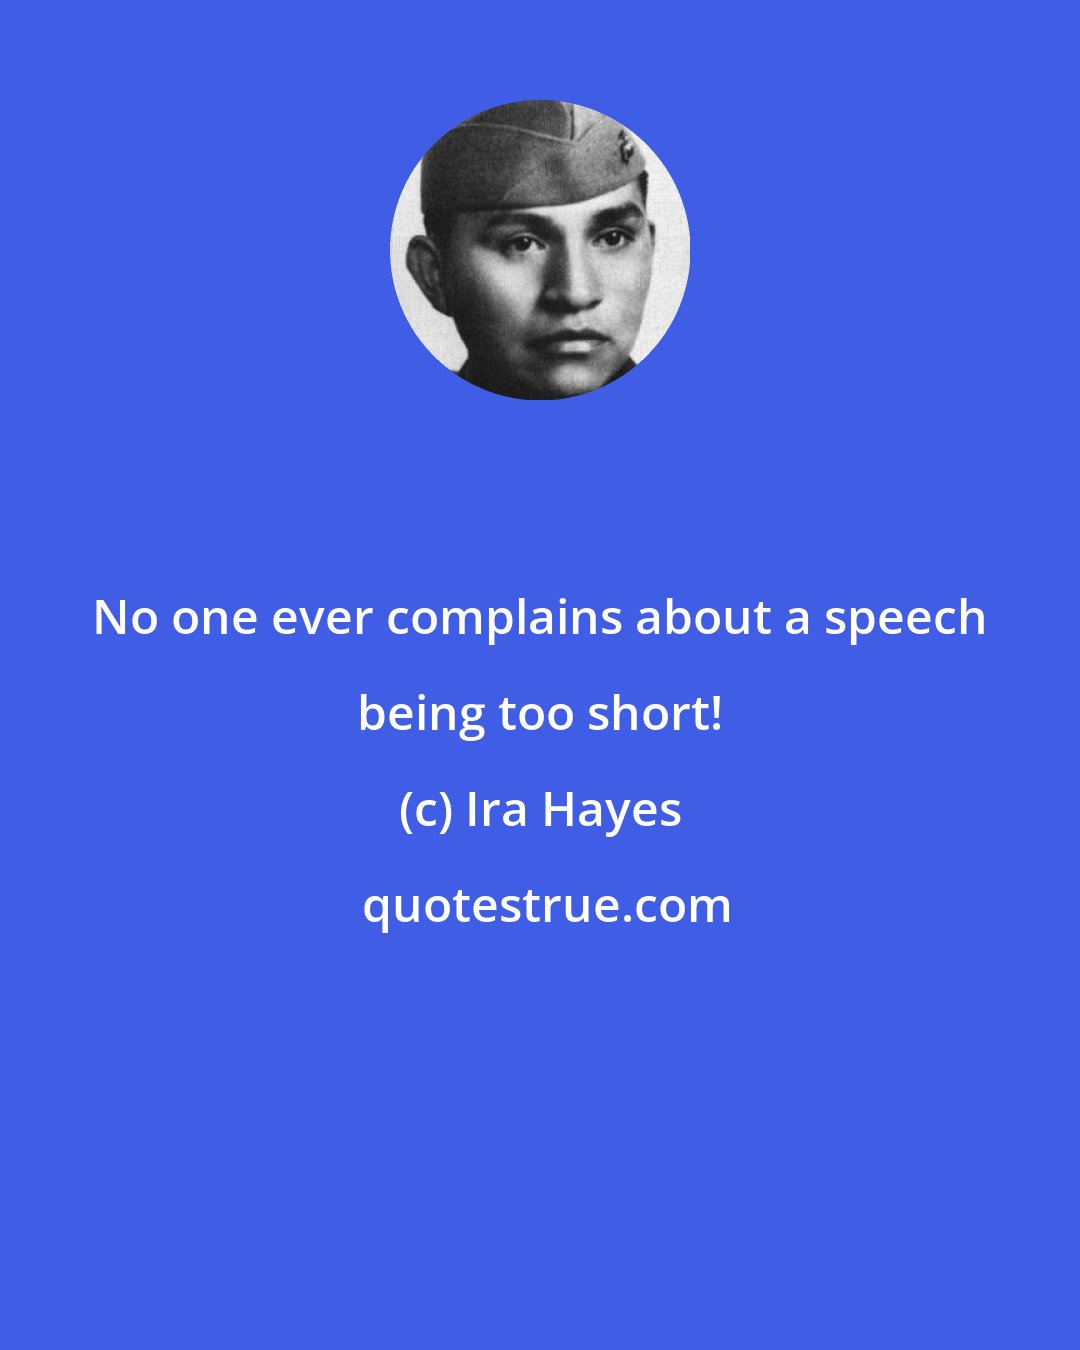 Ira Hayes: No one ever complains about a speech being too short!